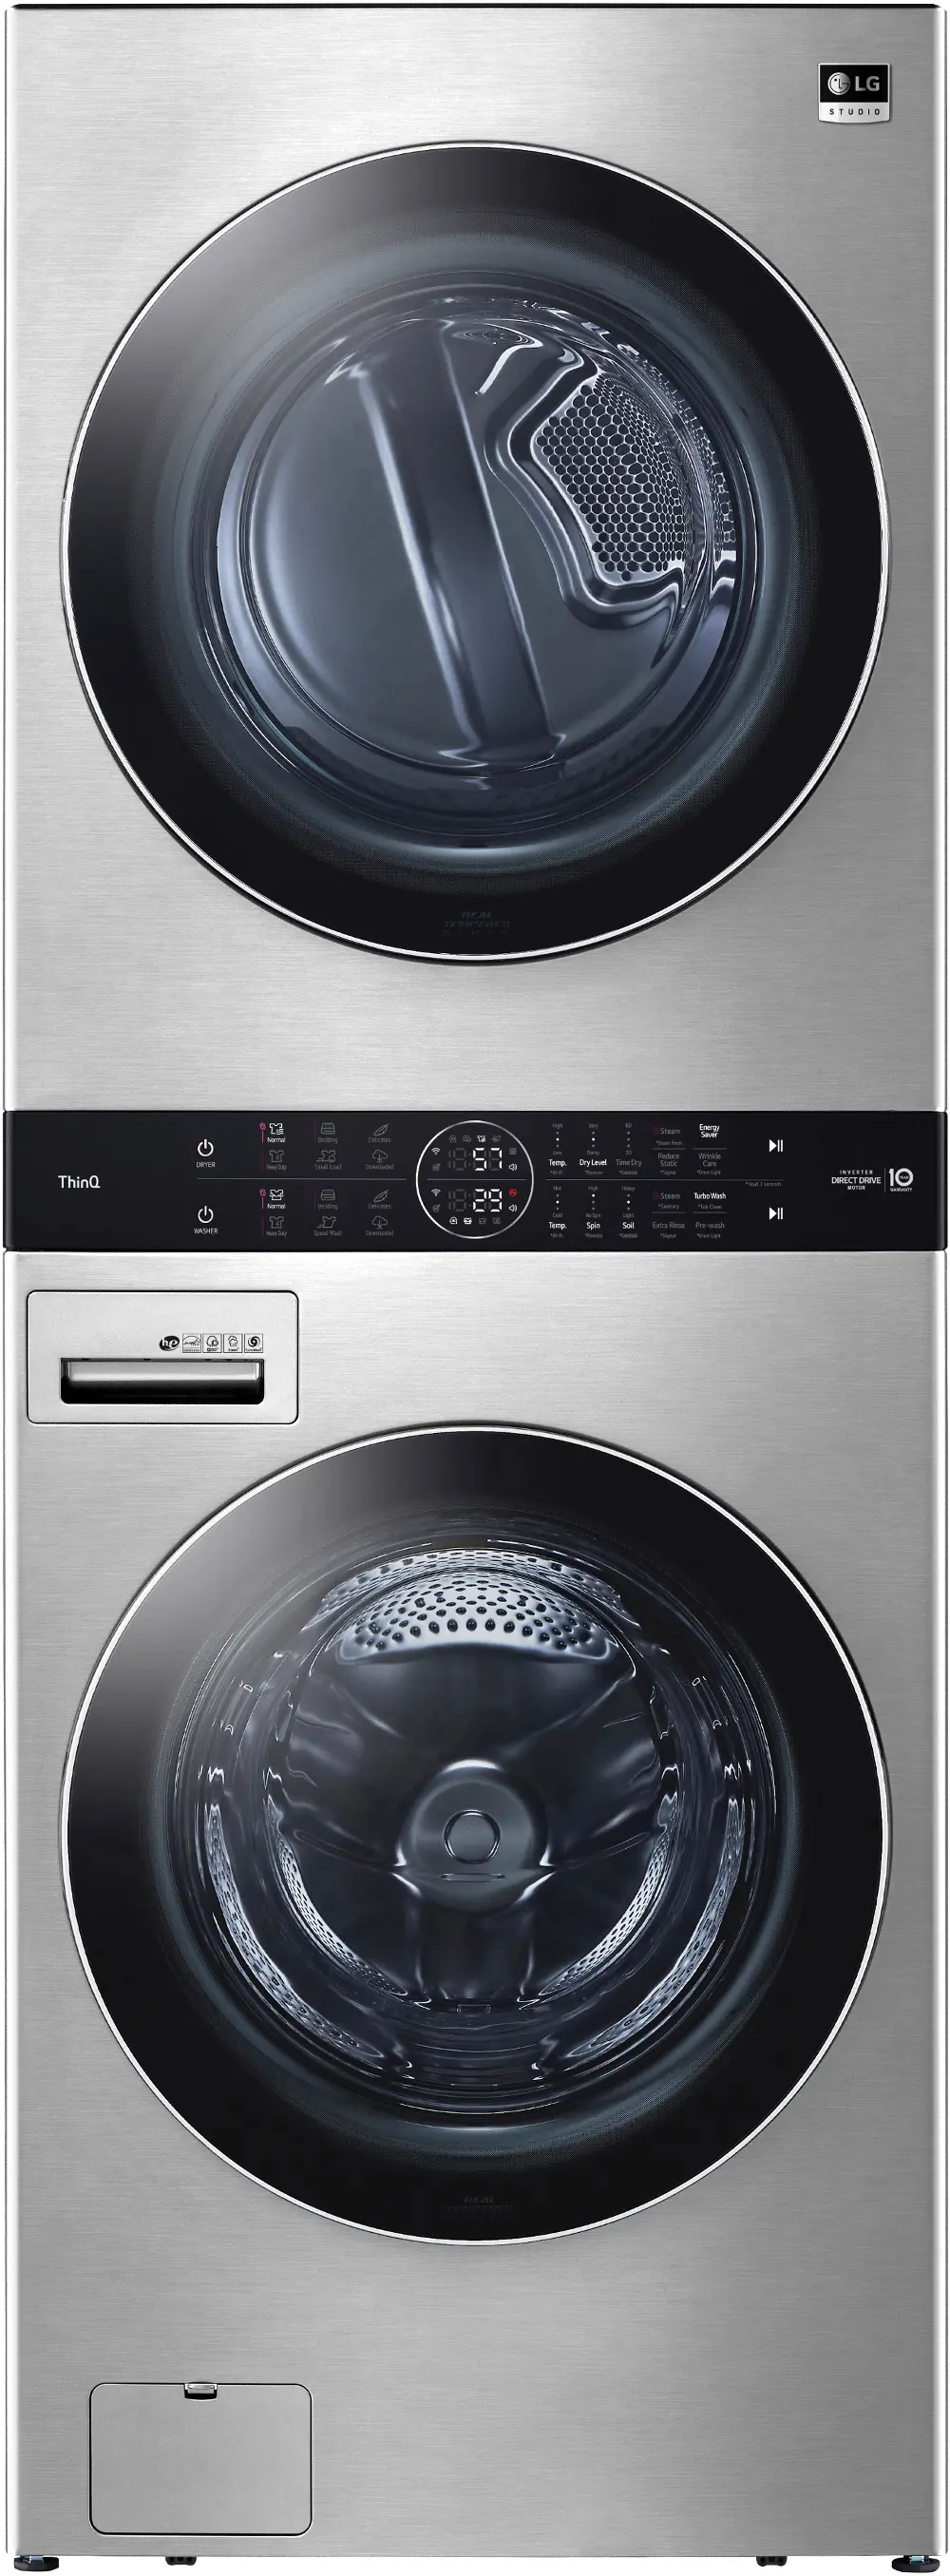 WSGX201HNA LG Studio Single Unit WashTower with Center Control 5 cu ft Washer and 7.4 cu ft Gas Dryer - Stainless Steel-1